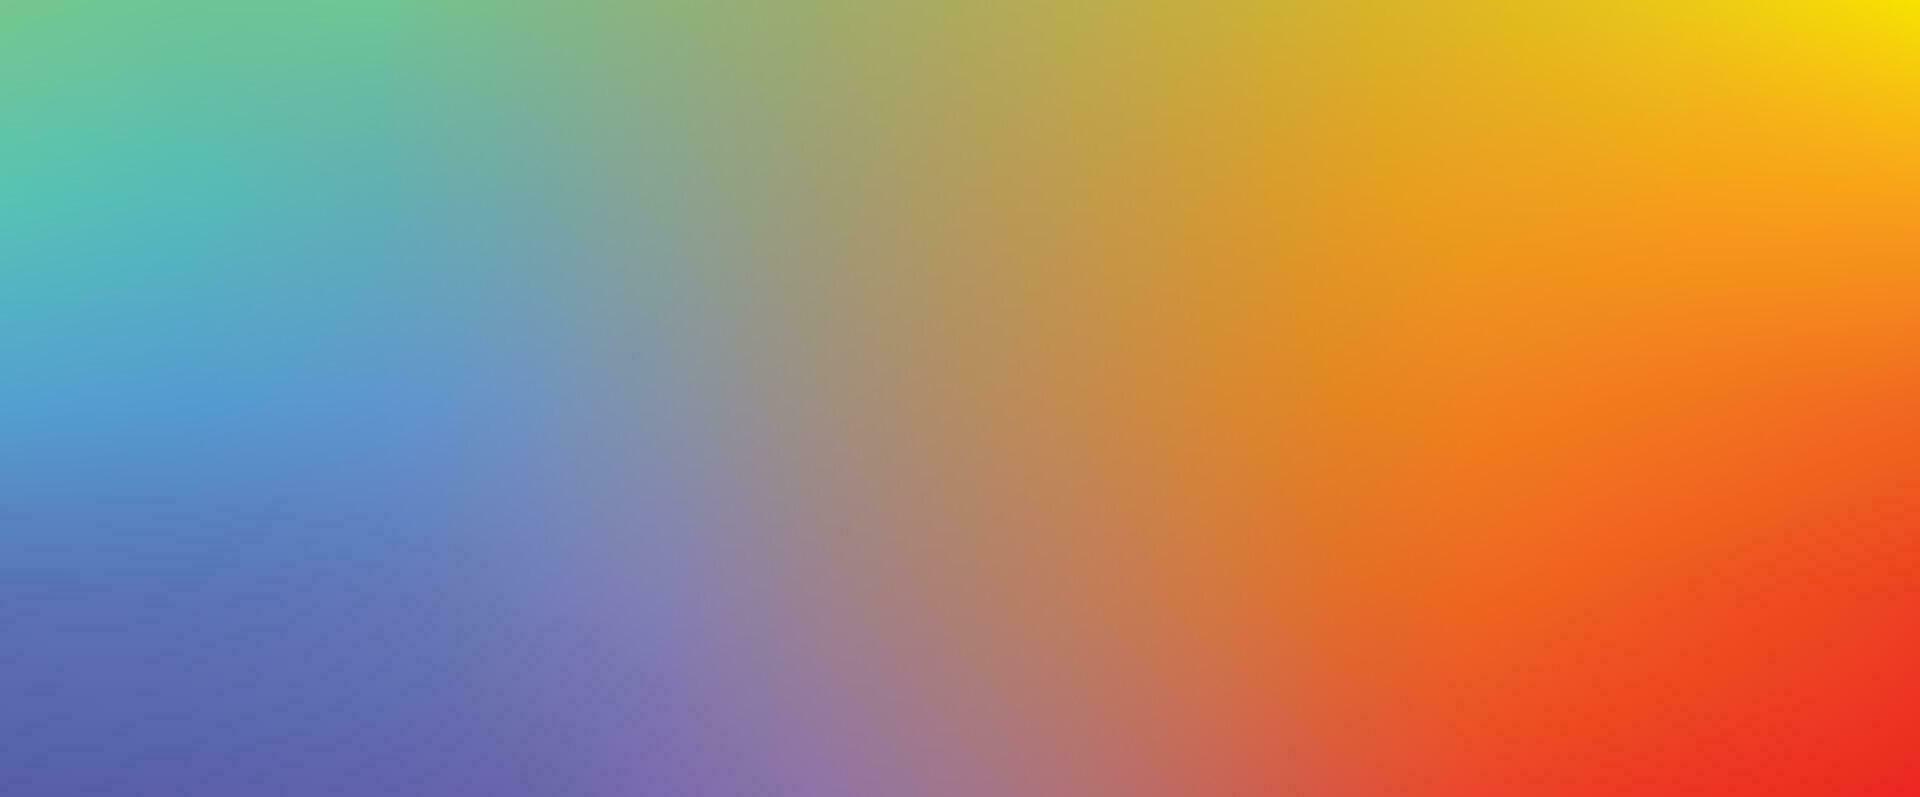 Gradient soft green blue red and yellow color background design template. vector